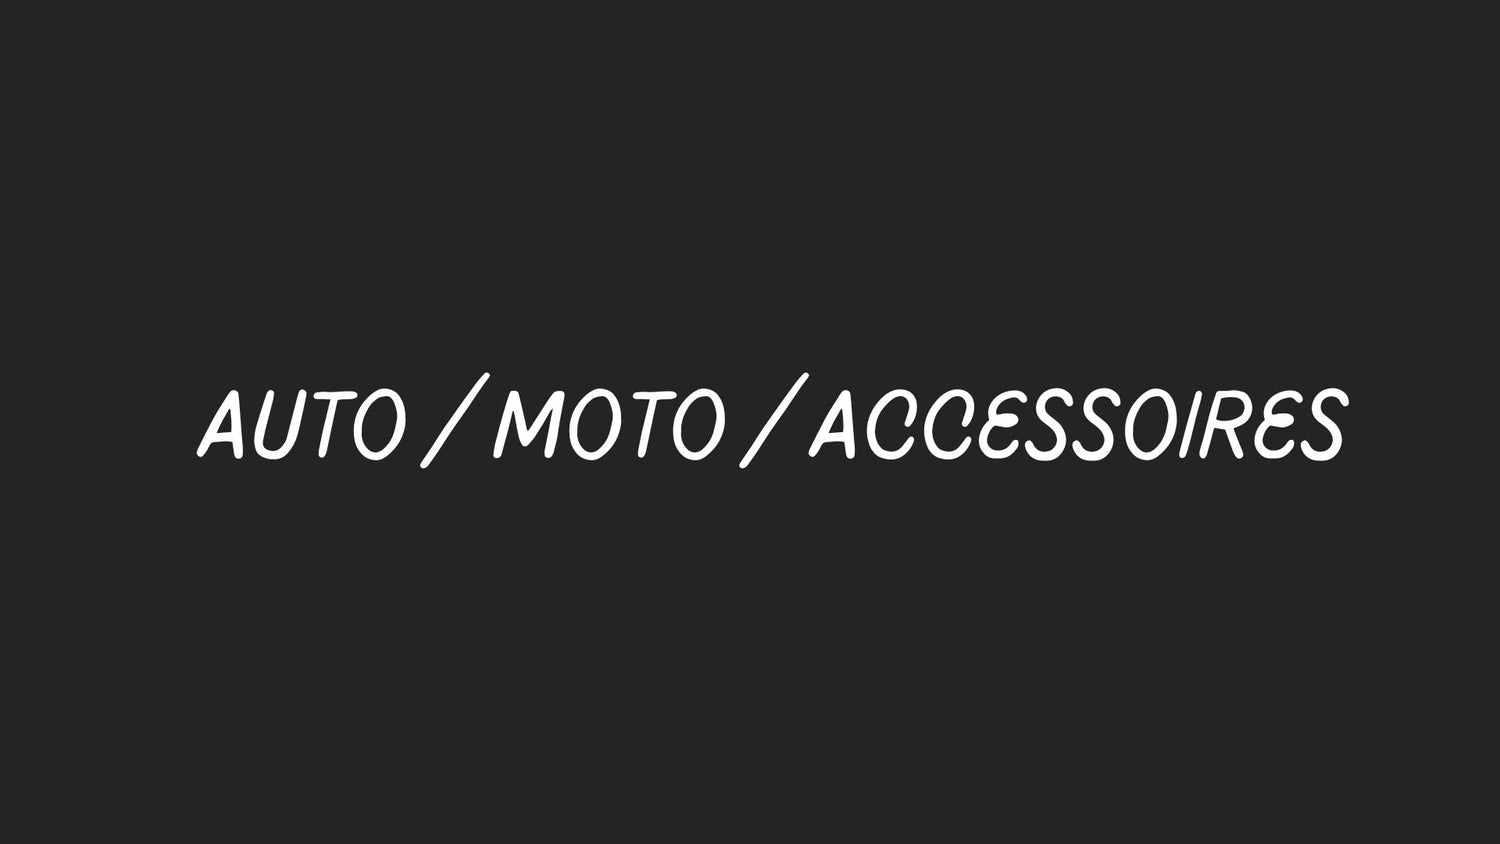 Auto / Motorcycle / Accessories